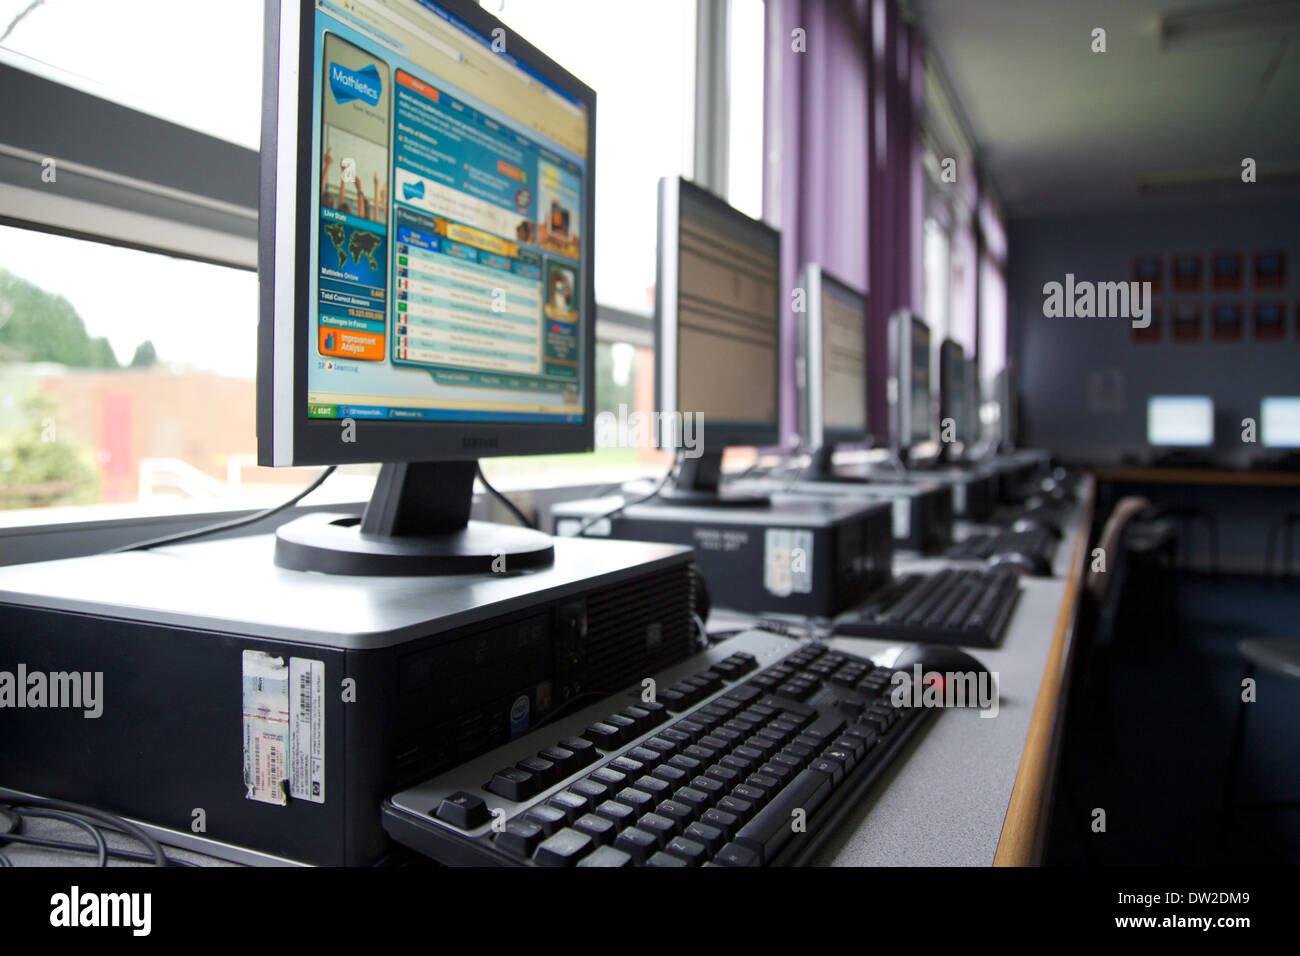 A line of desktop PCs computers in a UK classroom used for ICT lessons Stock Photo